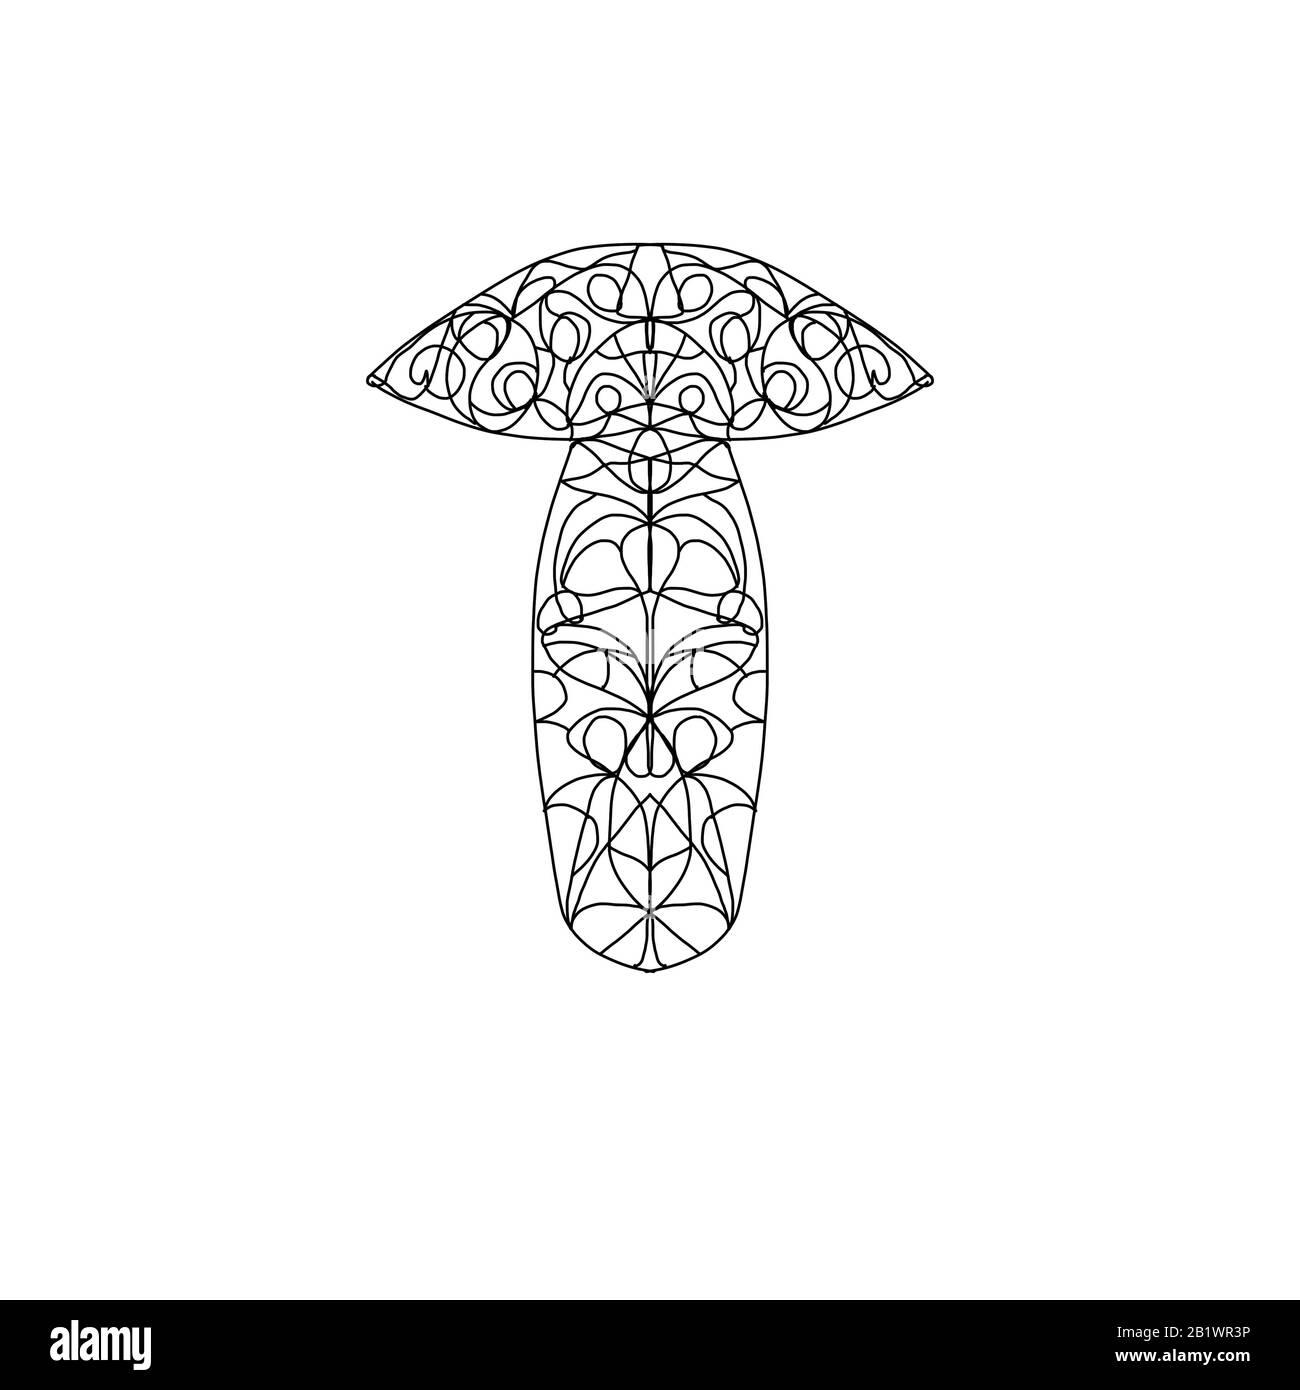 Mushroom coloring book with symmetric abstract pattern. coloring book Stock Photo